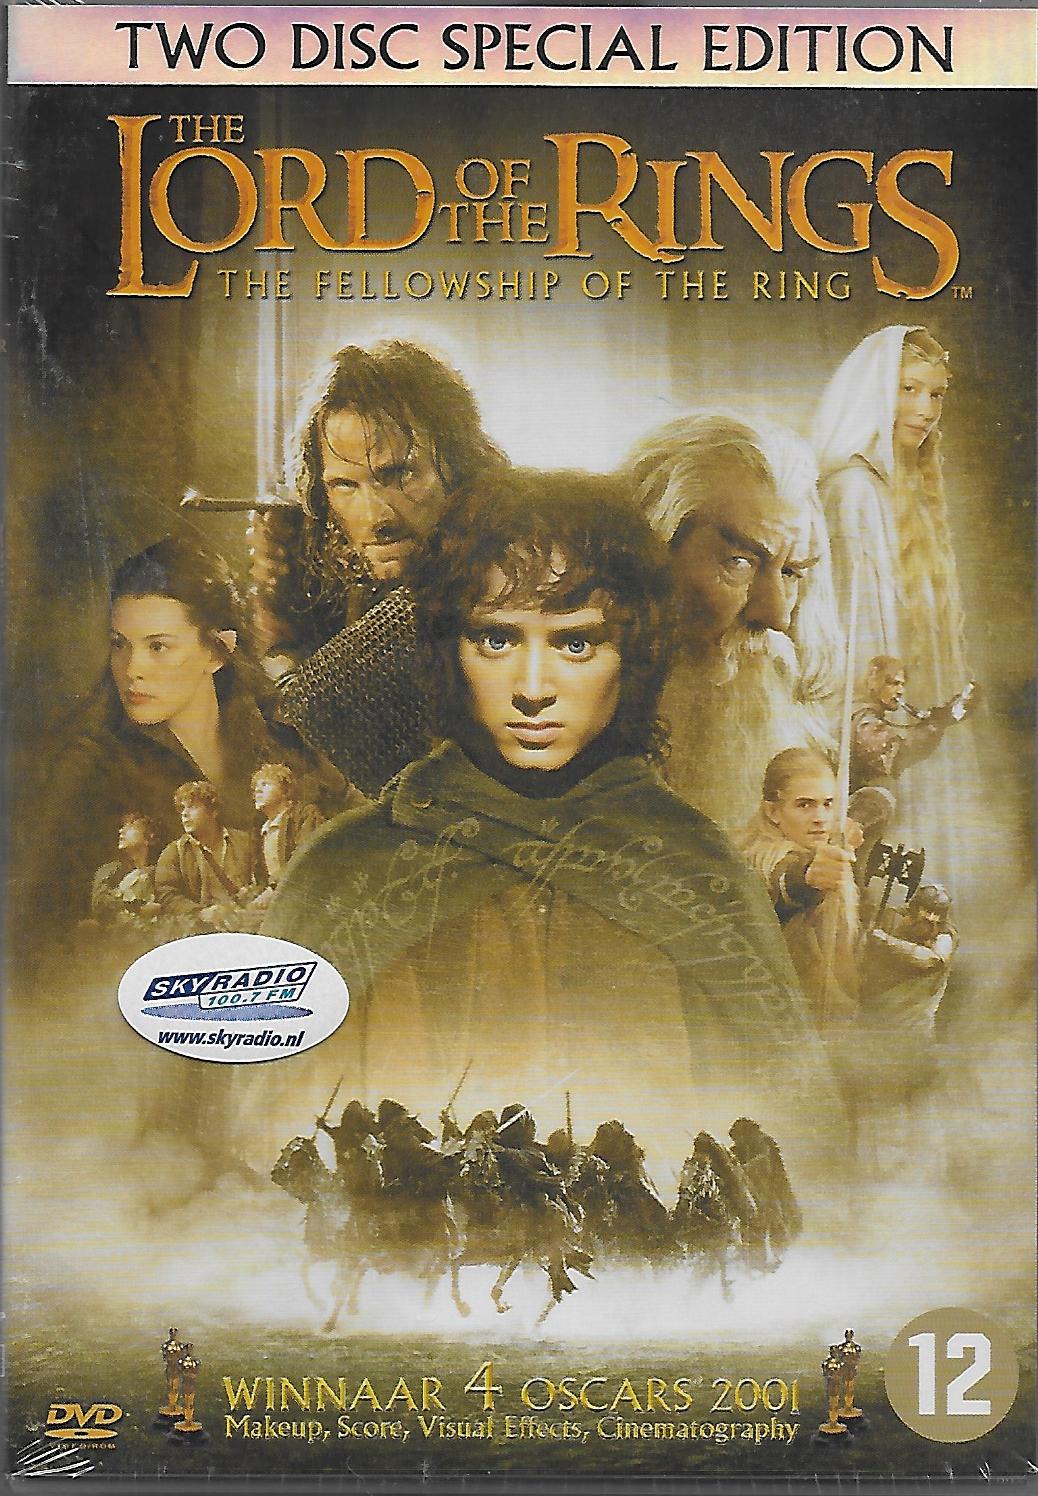 The lord of the rings